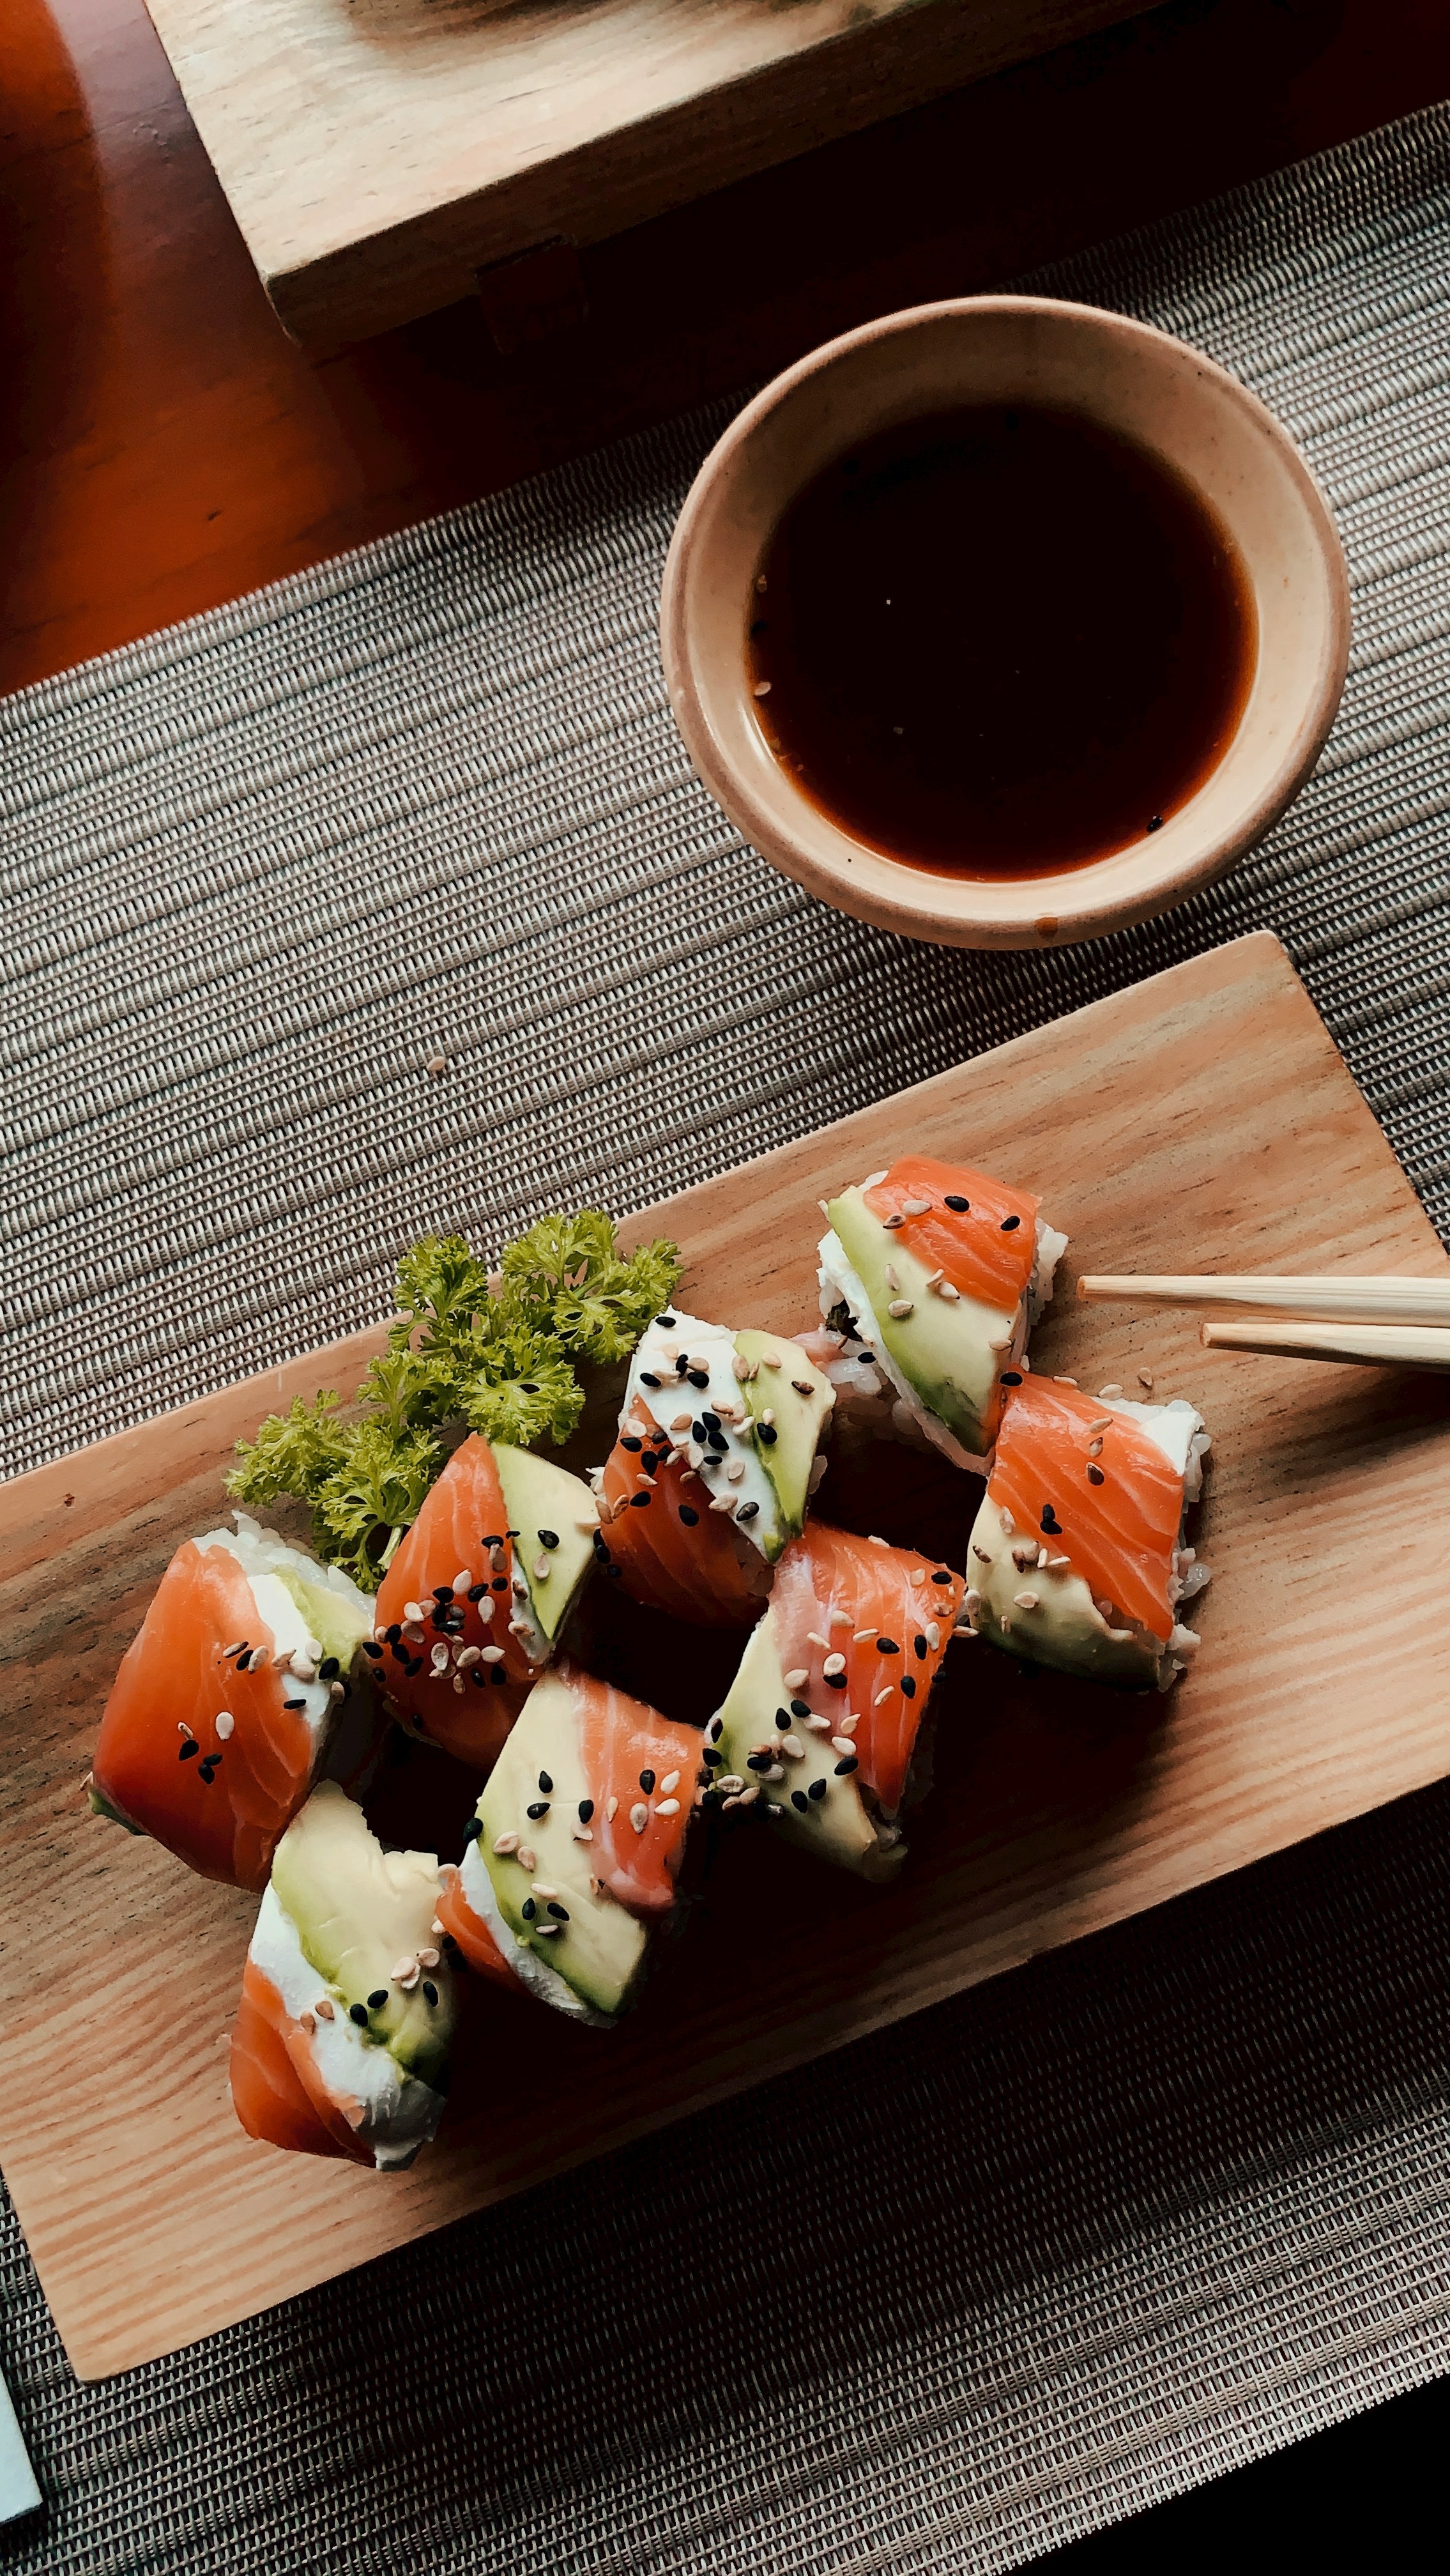 Plate of sushi rolls with salmon and avocado with black sesame seeds scattered on top